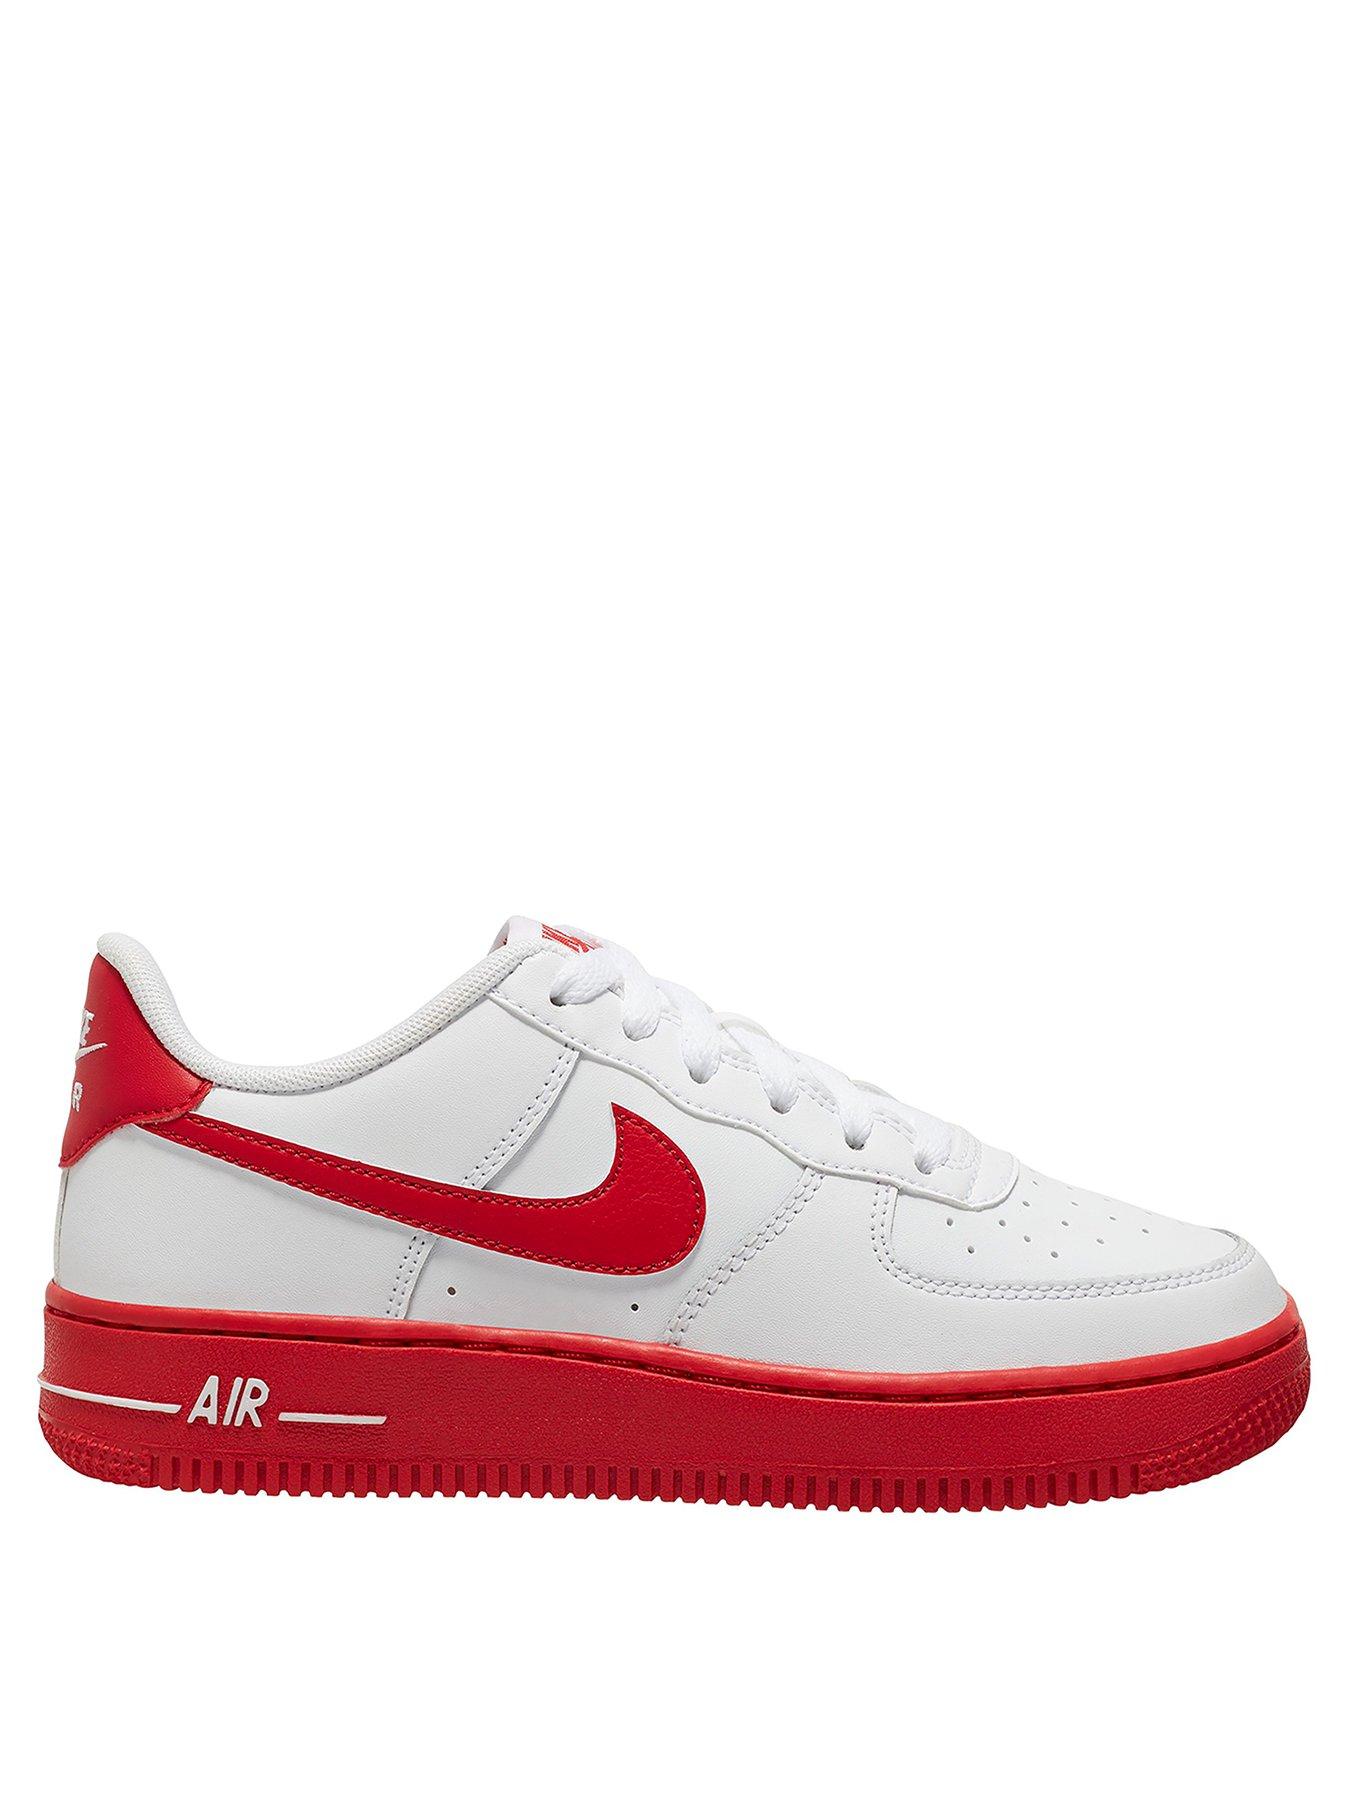 air force one junior size 4